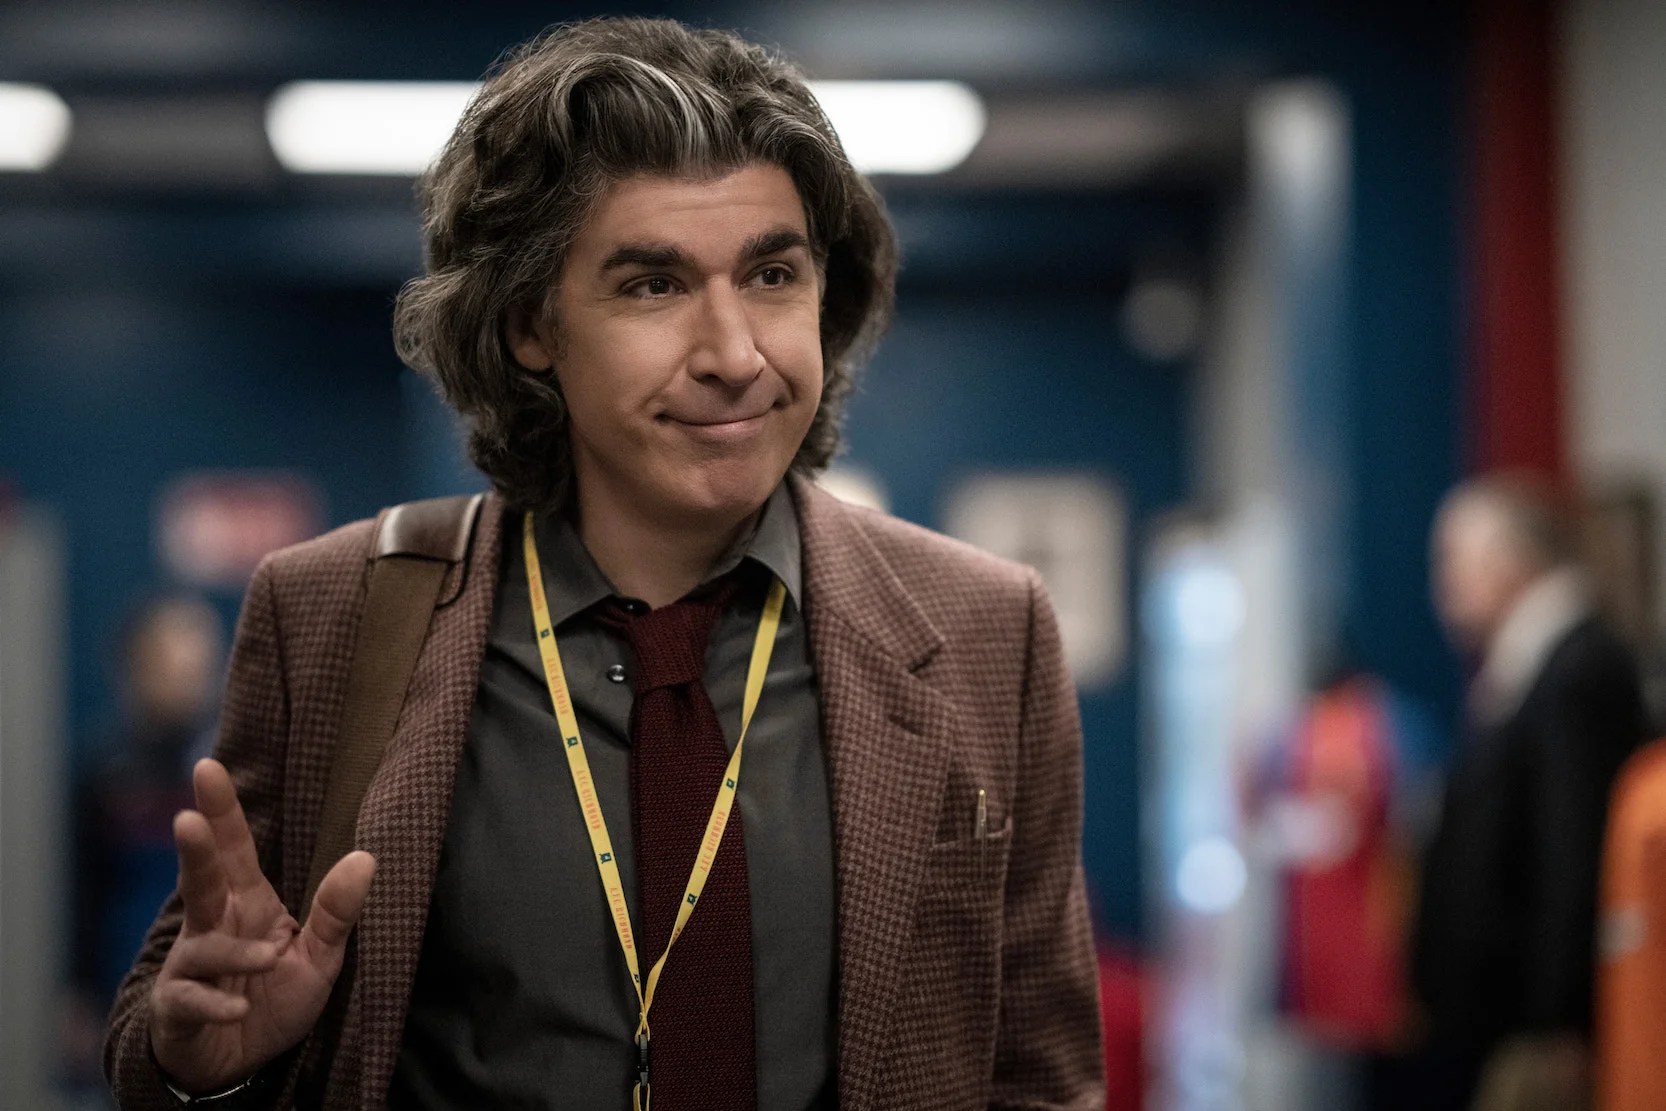 James Lance as journalist Trent Crimm on Apple TV+'s 'Ted Lasso.' He is a white man with thick, chin-length wavy brown hair. He's walking down a hallway in the locker room area of a sports arena wearing a brown, tweed blazer, a green buttondown, and a maroon tie. A yellow lanyard hangs around his neck, and he has a bag hanging from his shoulder by a brown strap. He's waving and giving a closed-mouthed smile to someone. 